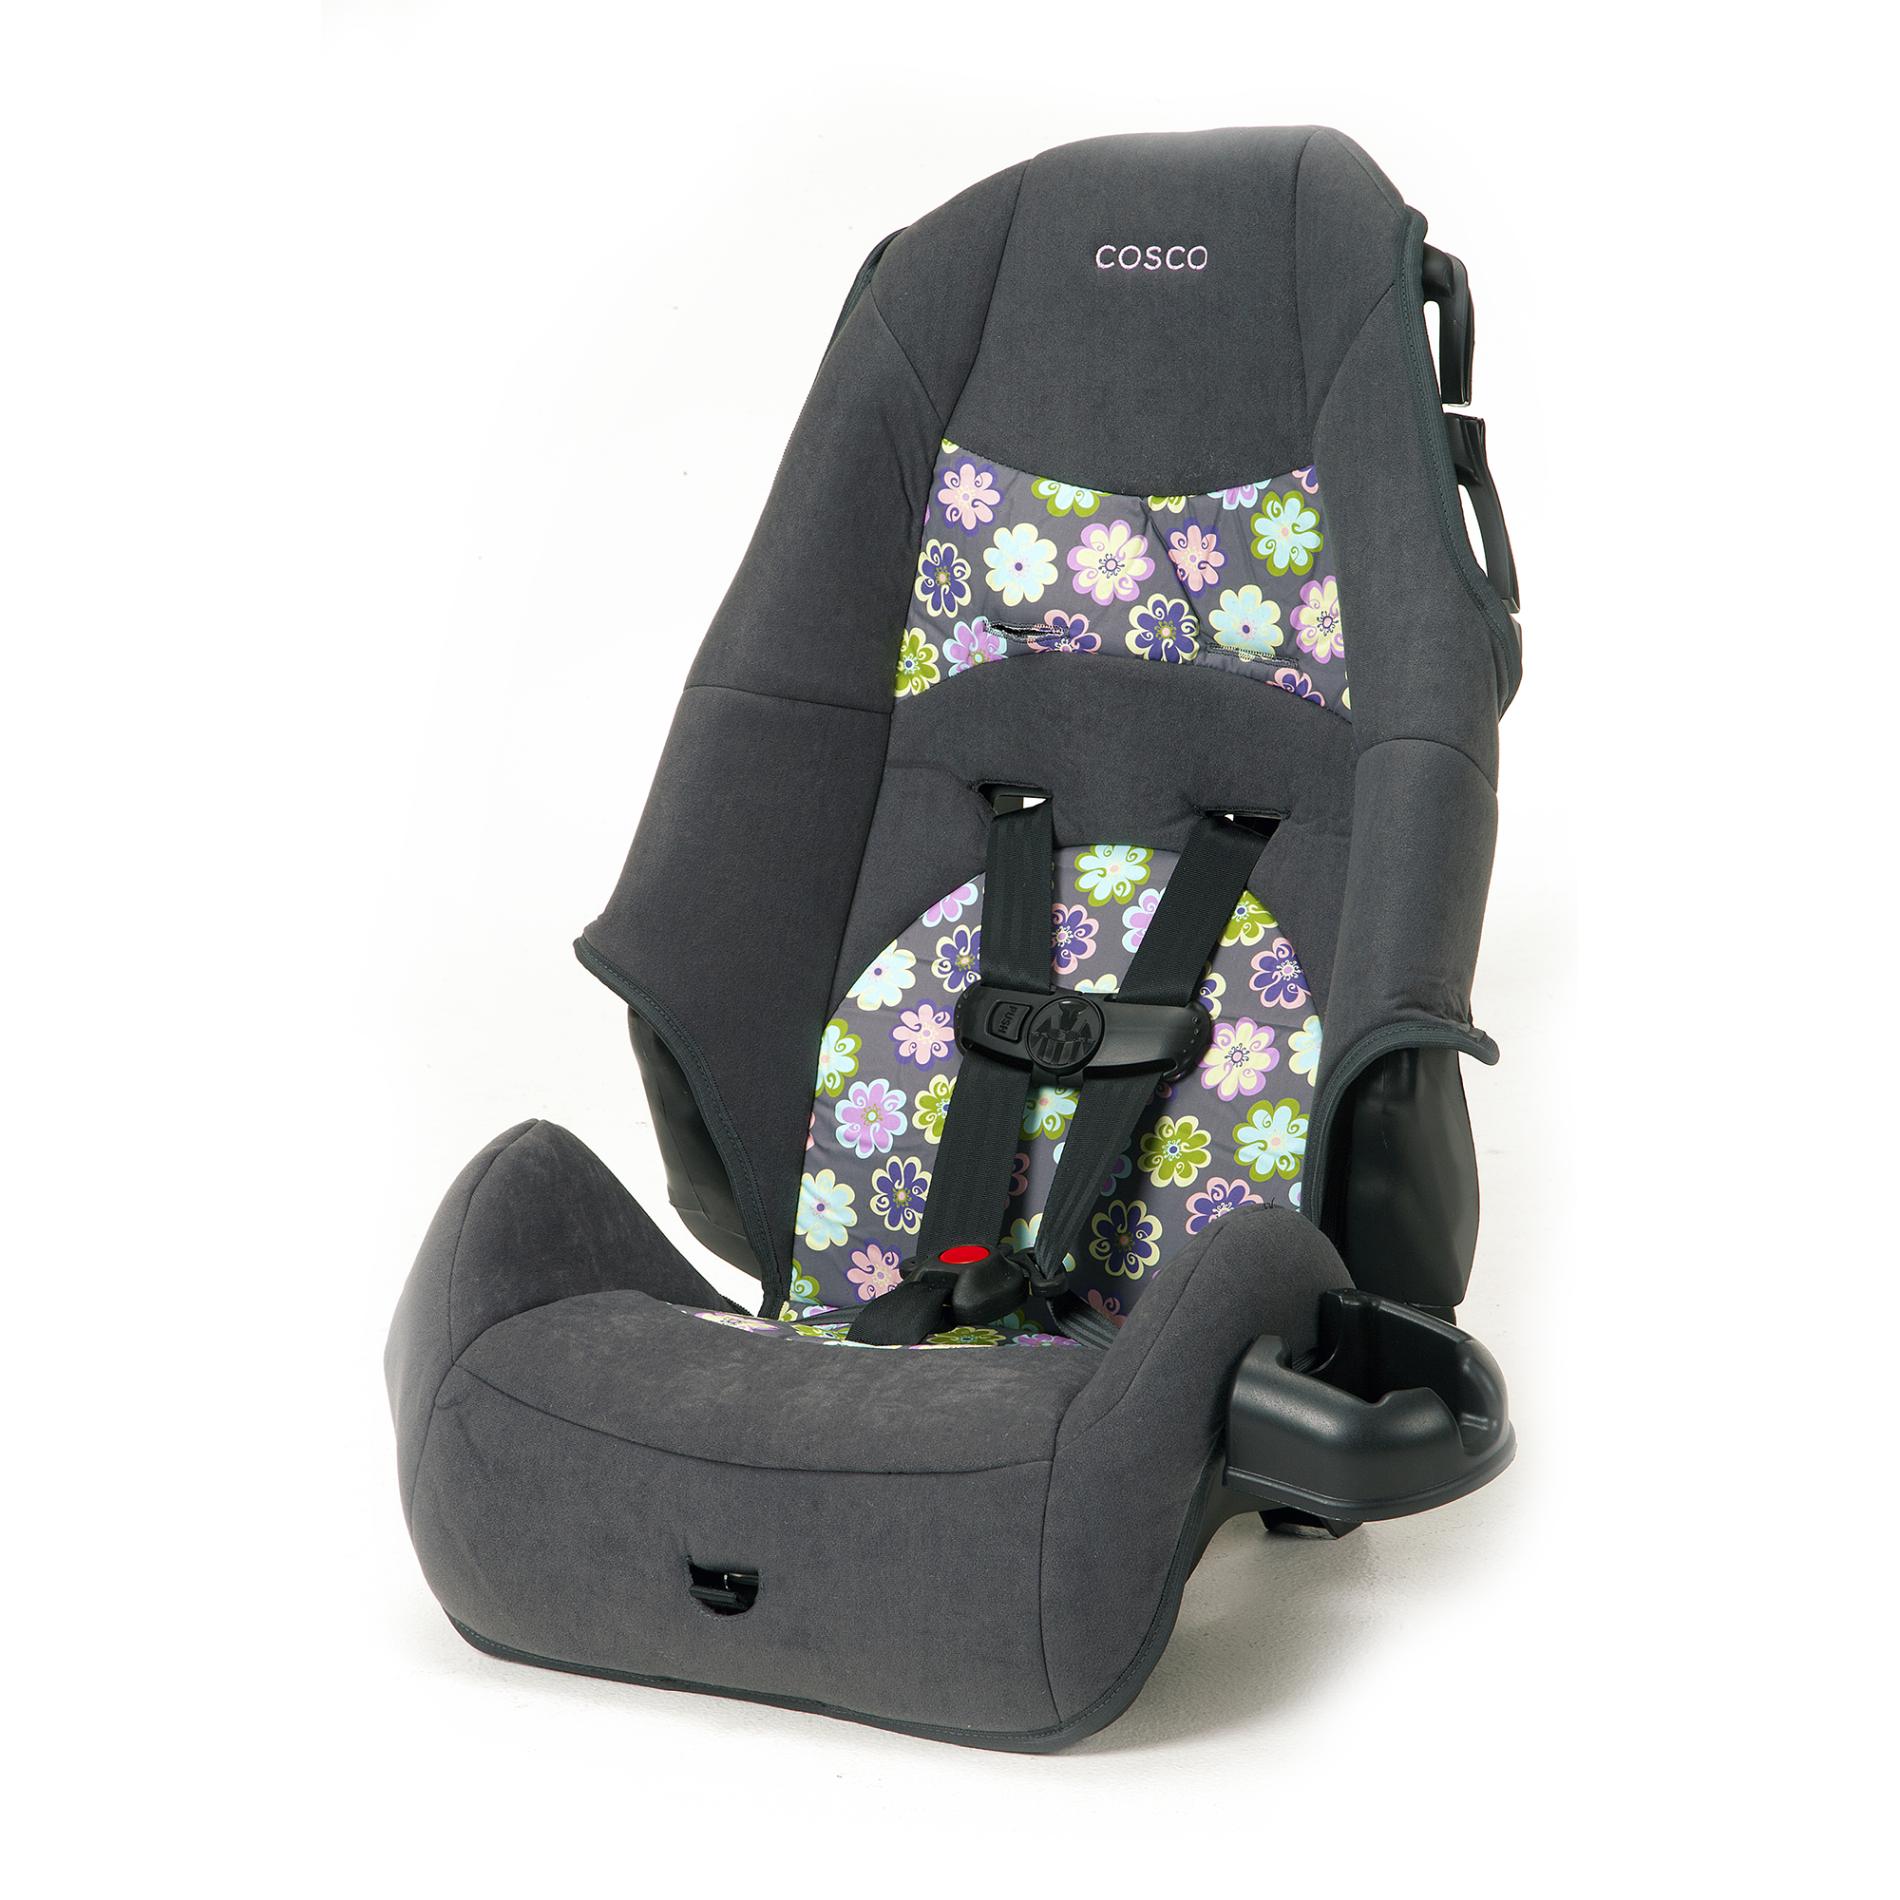 Cosco High-Back Booster Car Seat - Floral